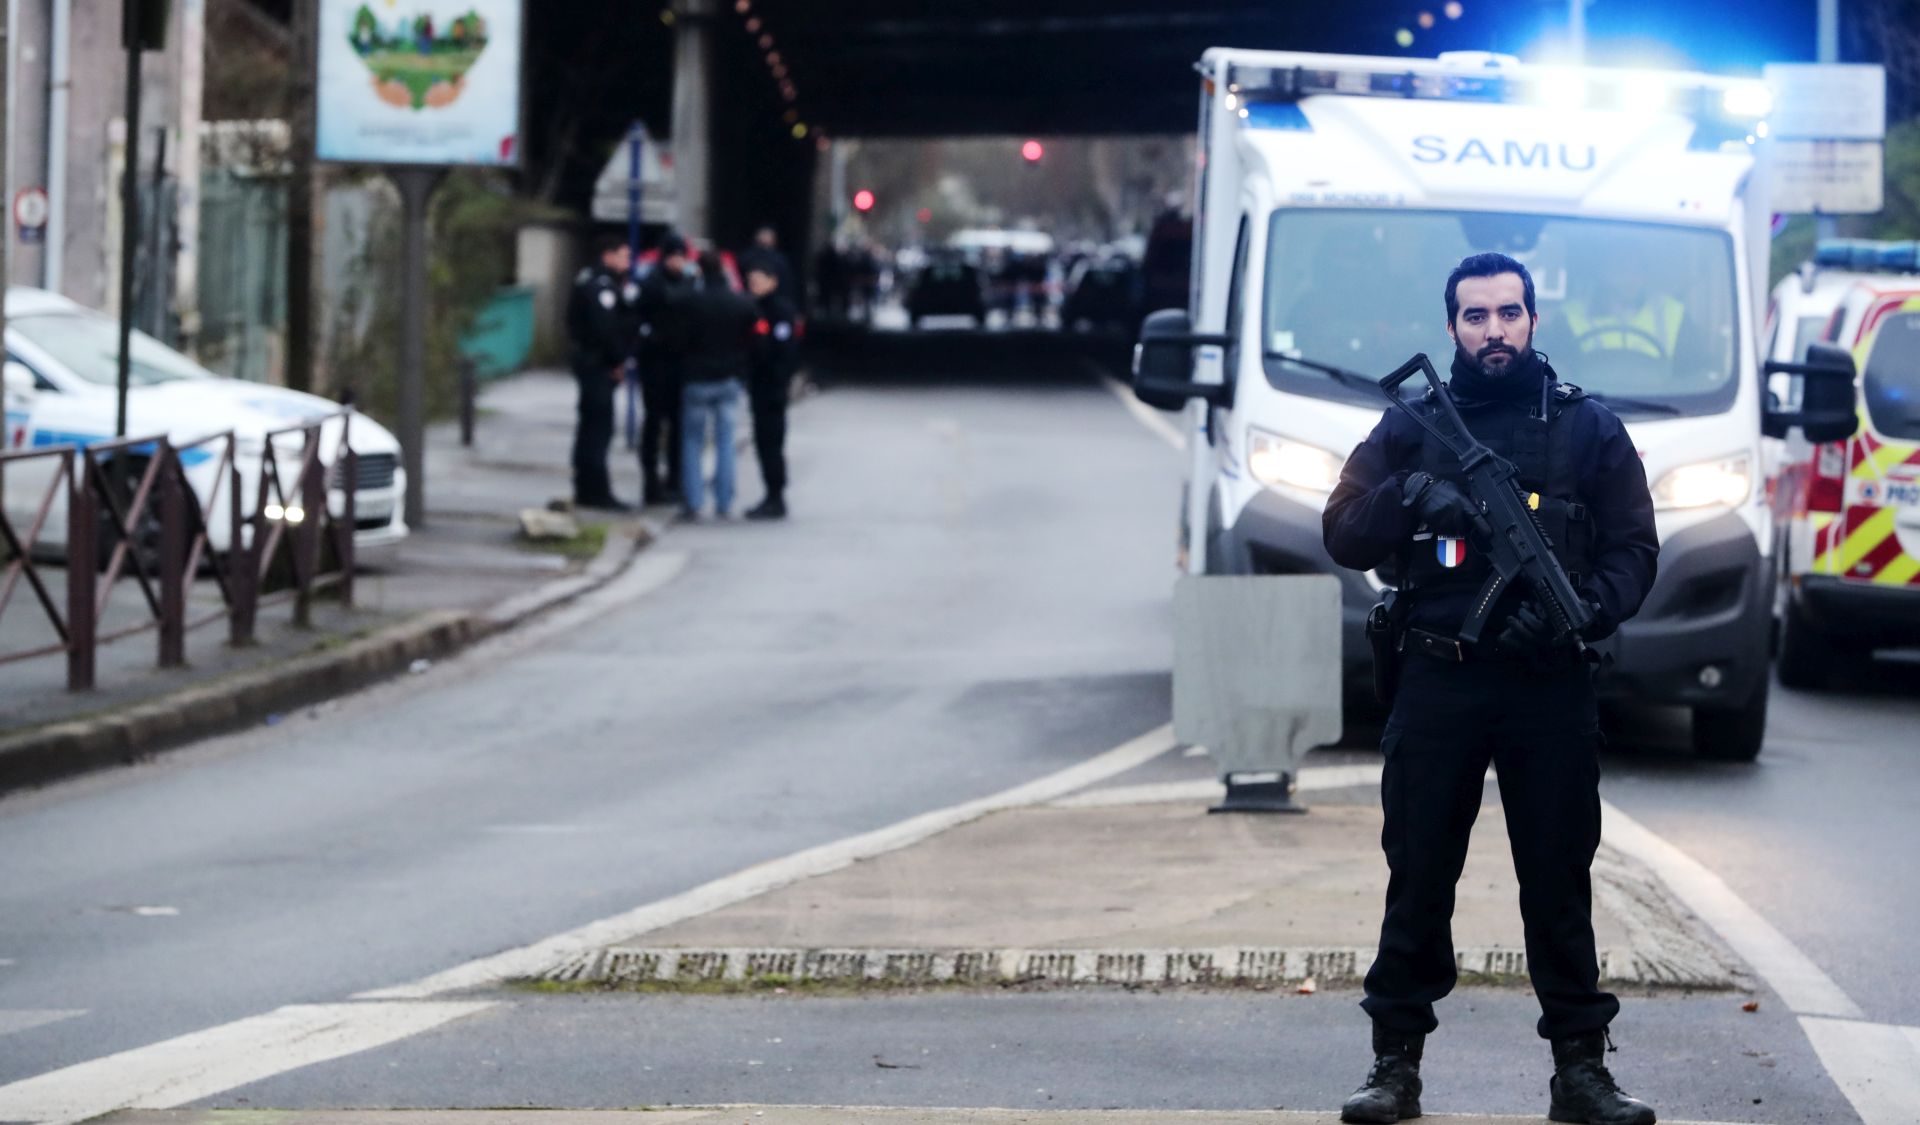 epa08100395 French police and rescue team stand at a security perimeter at the Hautes-Bruyeres public park in Villejuif, near Paris, France, 03 January 2020, after a man stabbed several people. According to recent reports, one person died, two are seriously injured. Police killed the assailant.  EPA/CHRISTOPHE PETIT TESSON